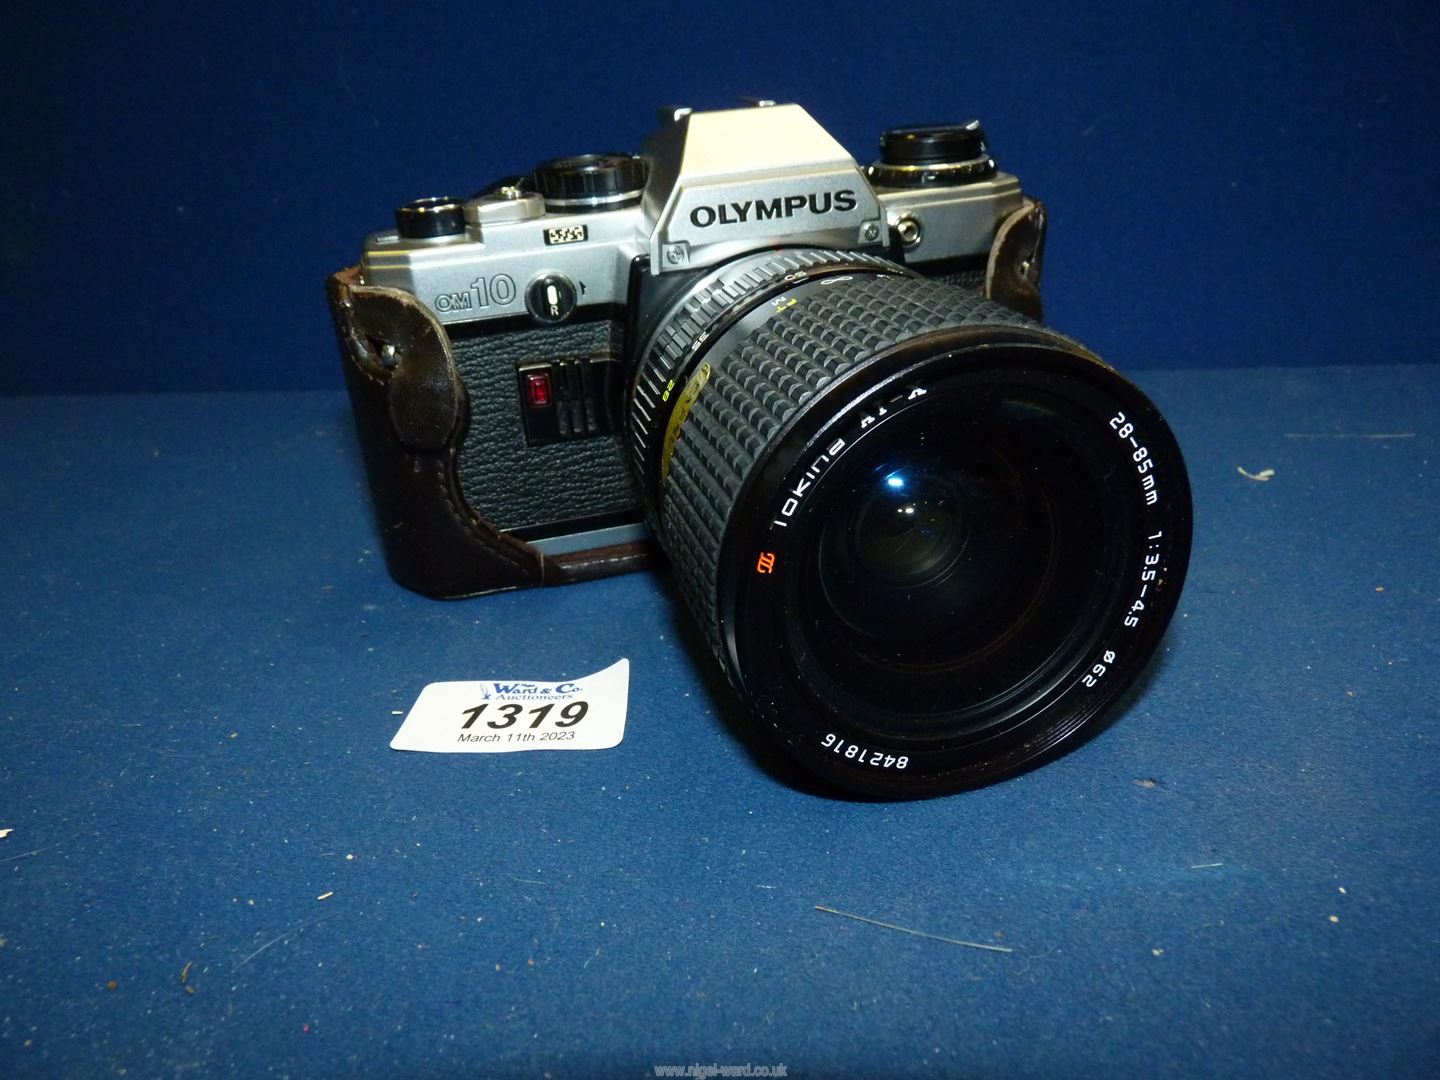 An Olympus OM10 35mm SLR Camera together with a Tokina AT-X 28-85mm f/3.5-4.5 zoom lens.